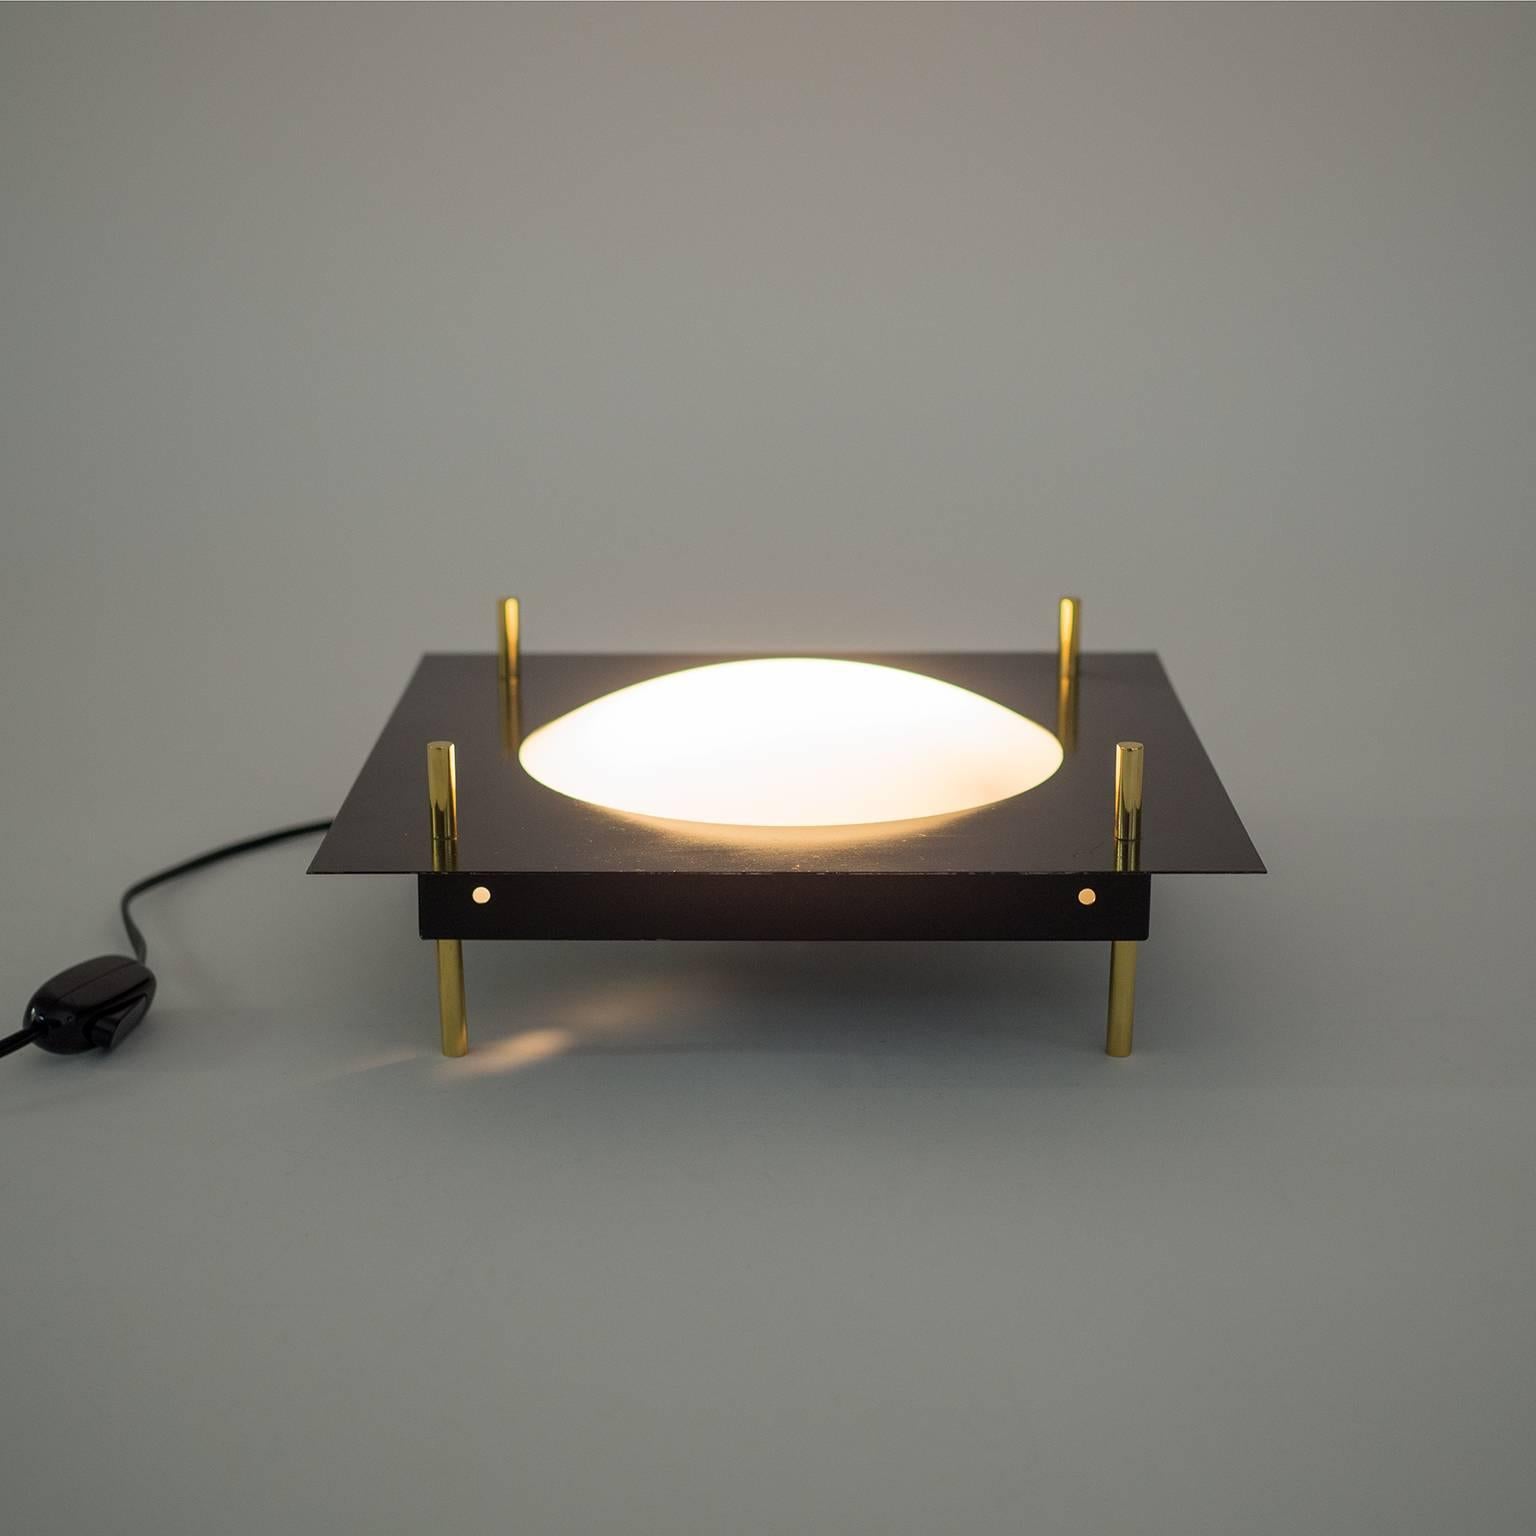 Italian Modernist Table Lamp Attributed to Stilnovo, 1950s For Sale